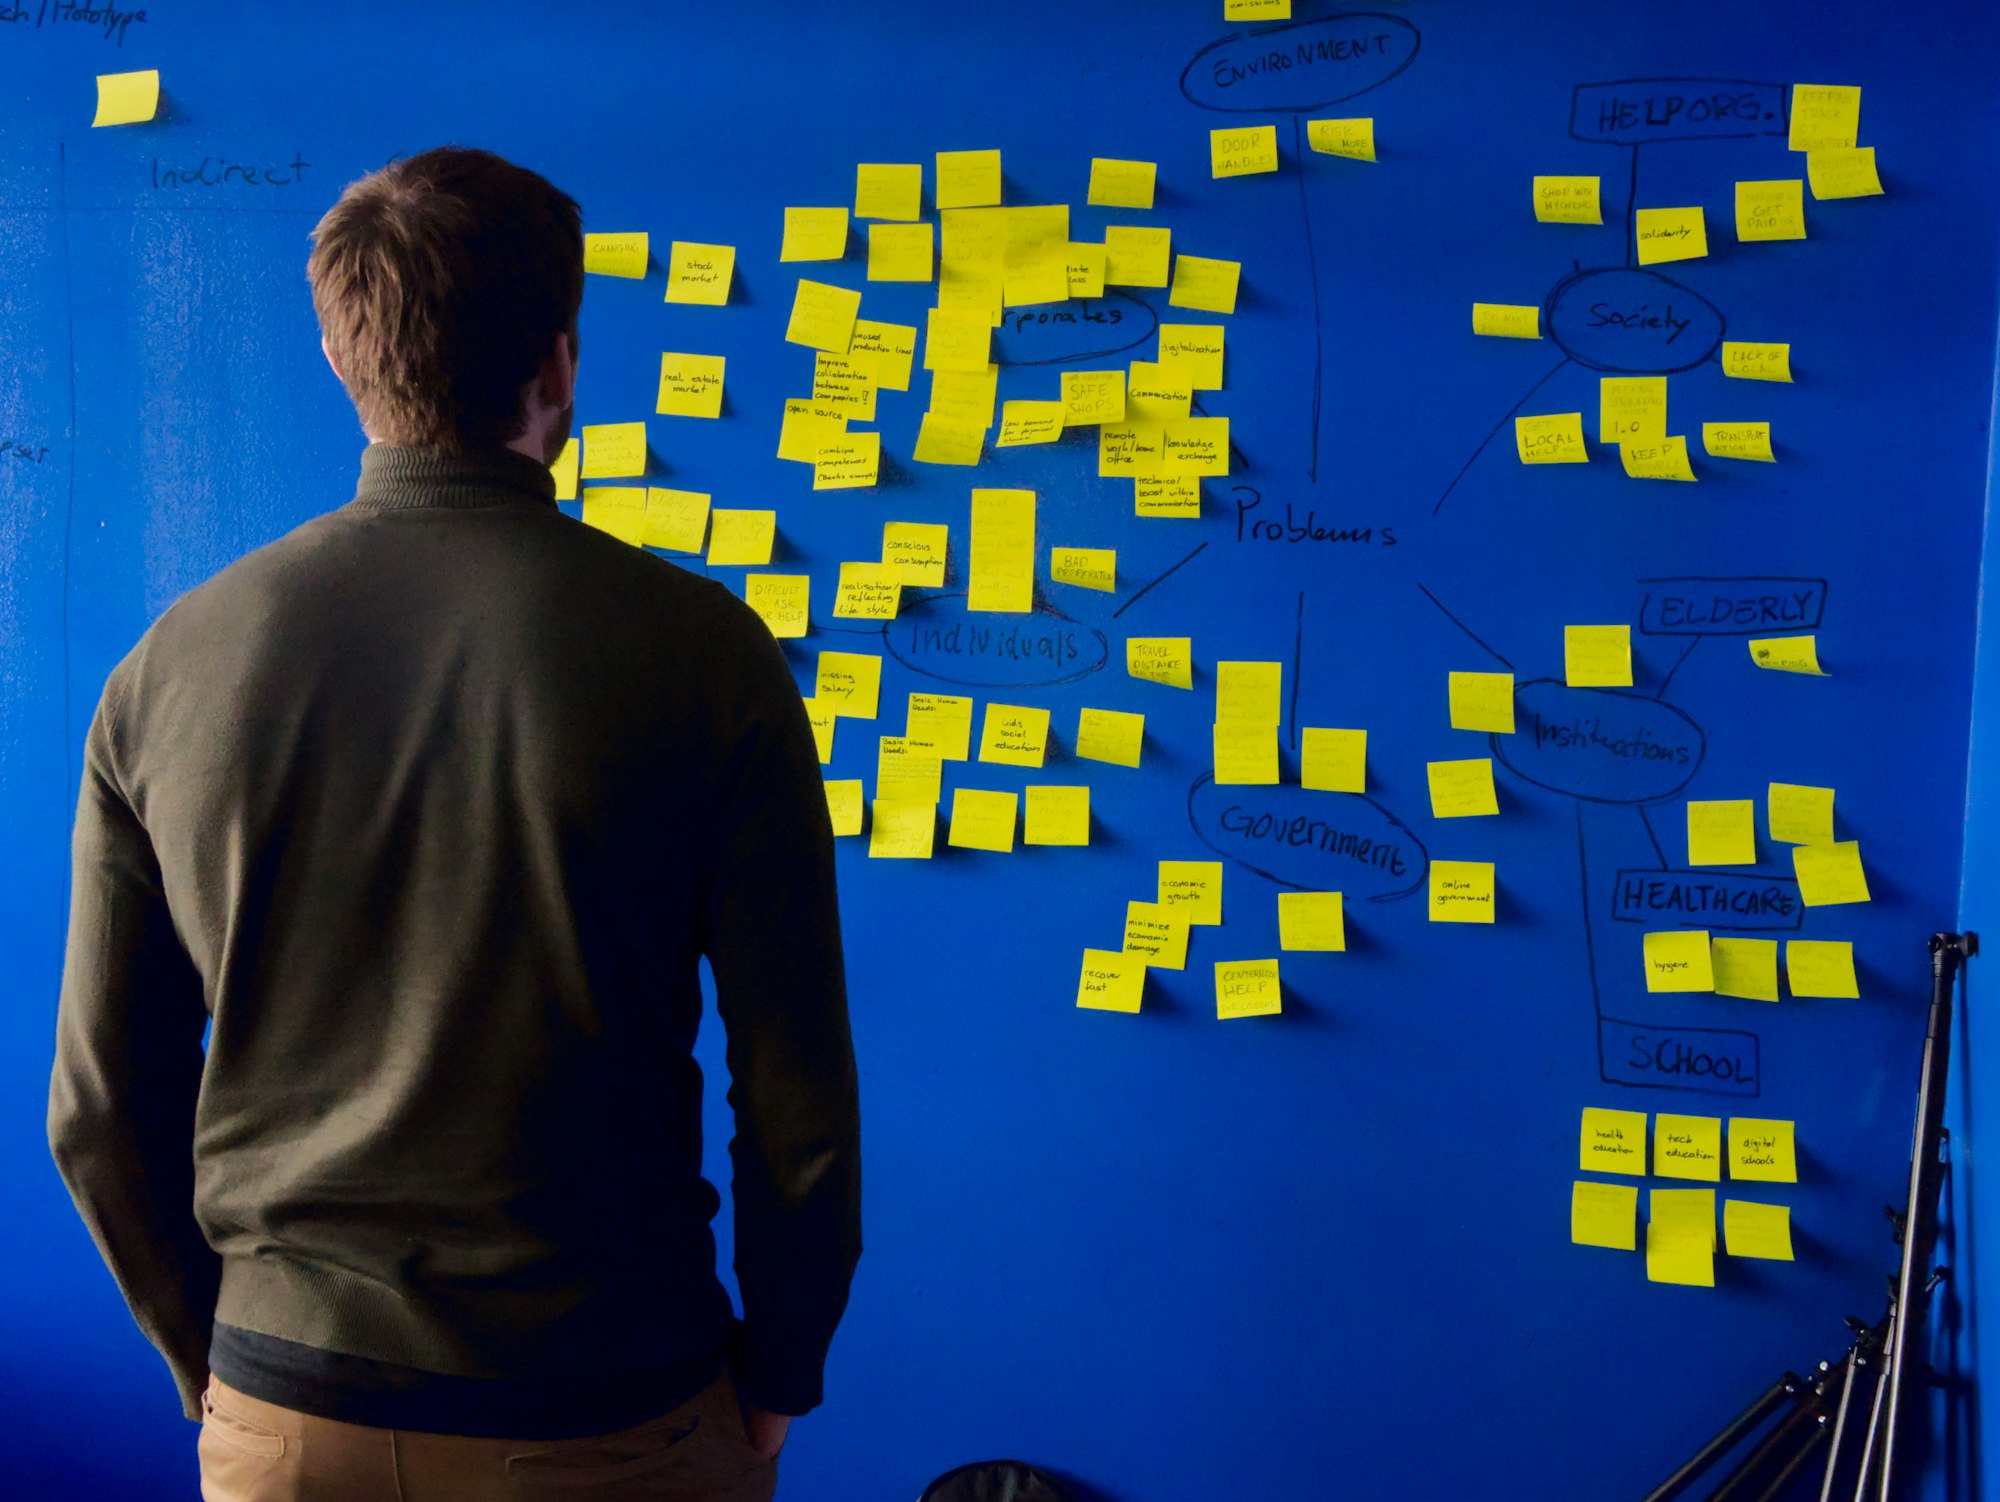 Brainstorming ideas with post-it notes